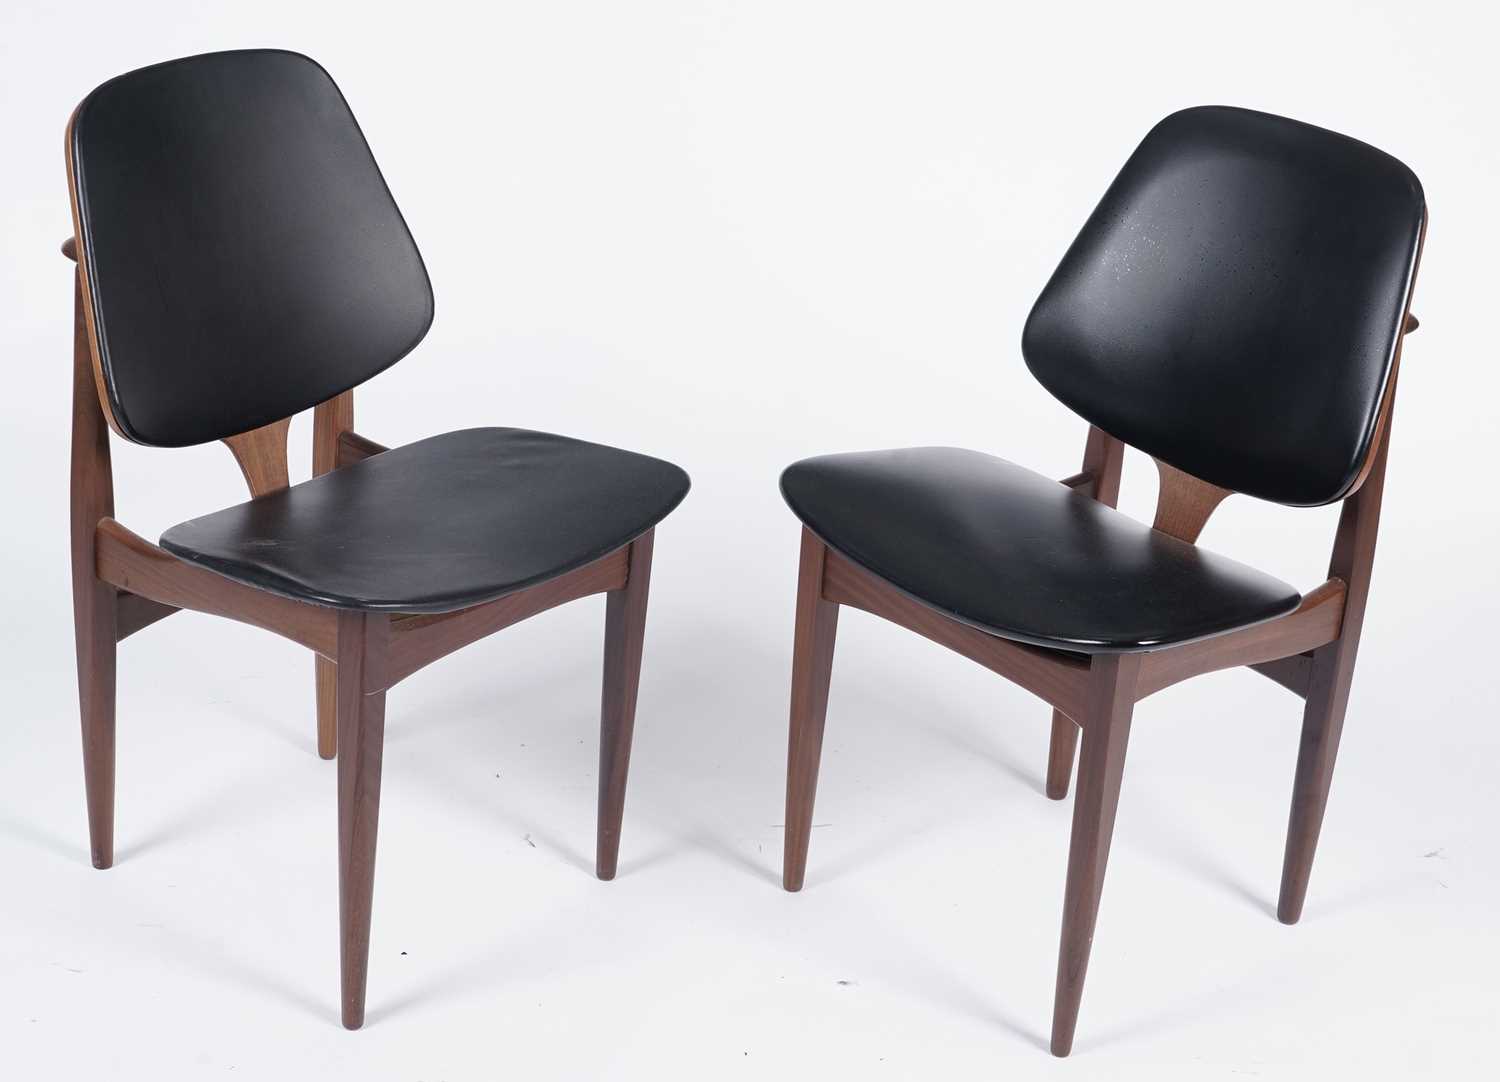 6 teak and black vinyl dining chairs - Image 3 of 5